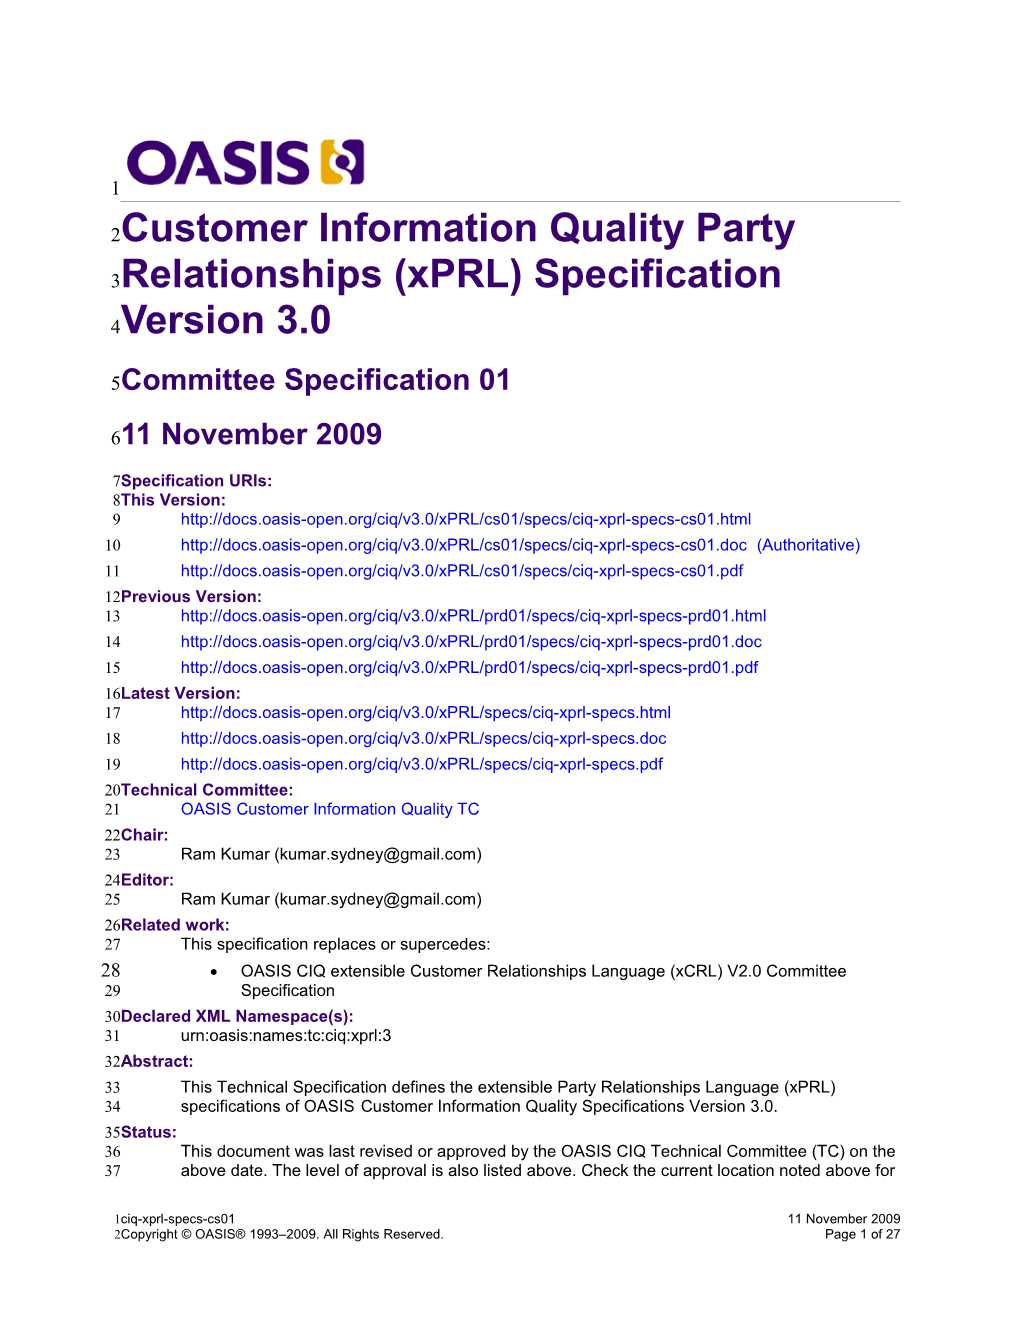 Customer Information Quality Specifications Version 3.0 - Party Relationships (Xprl)